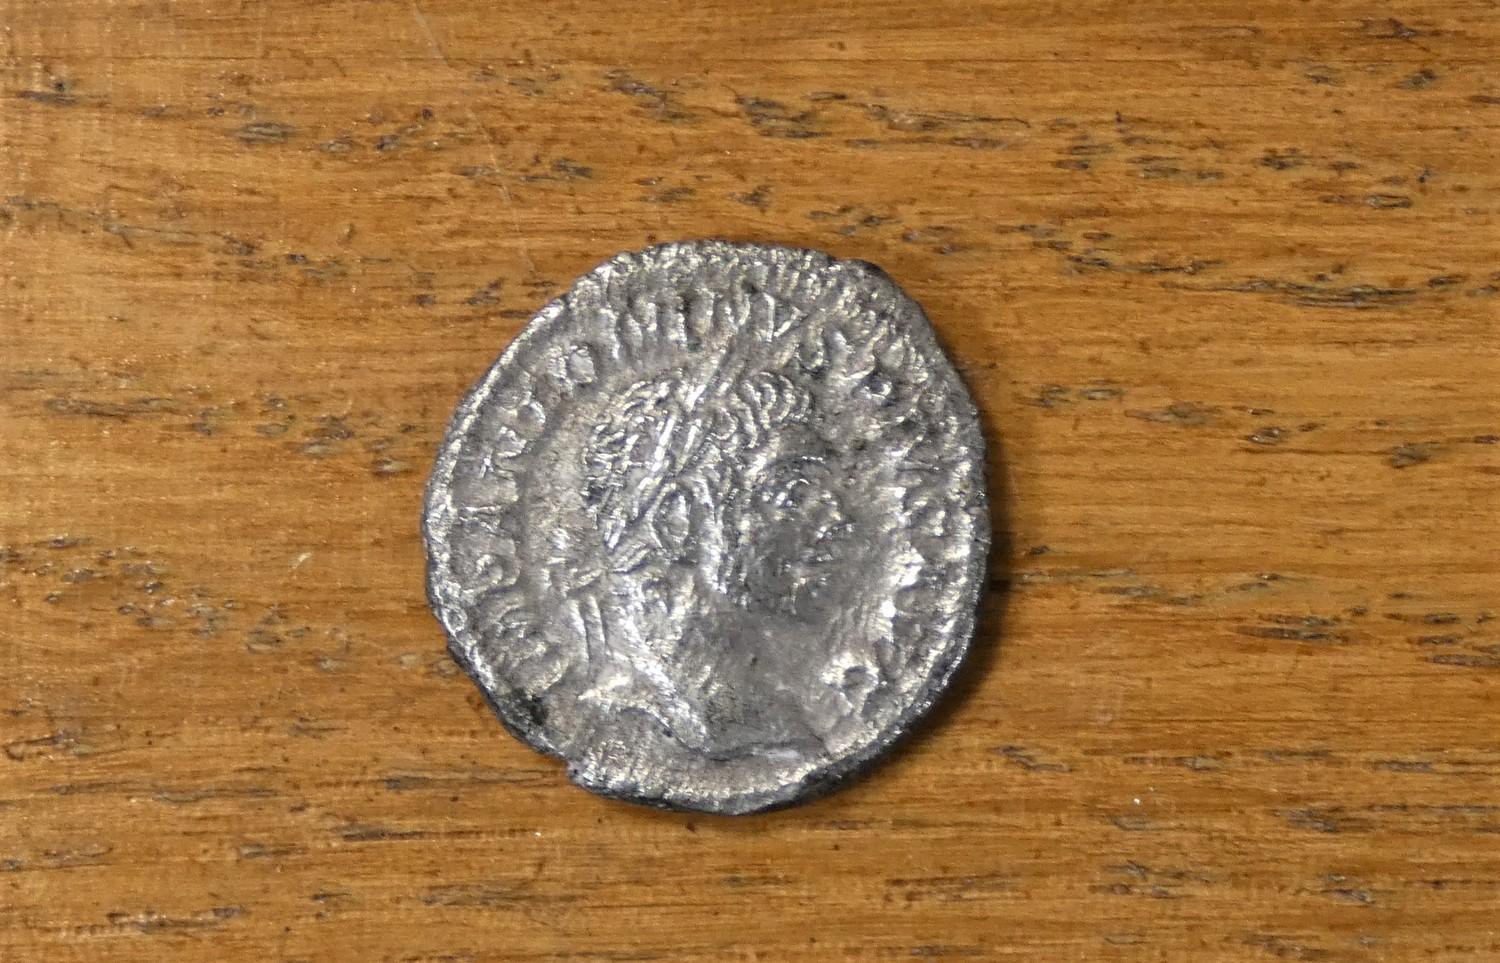 An Elagabalus (AD 218 - 222) coin and a piece of rock from Hadrians wall, mounted. - Image 2 of 2